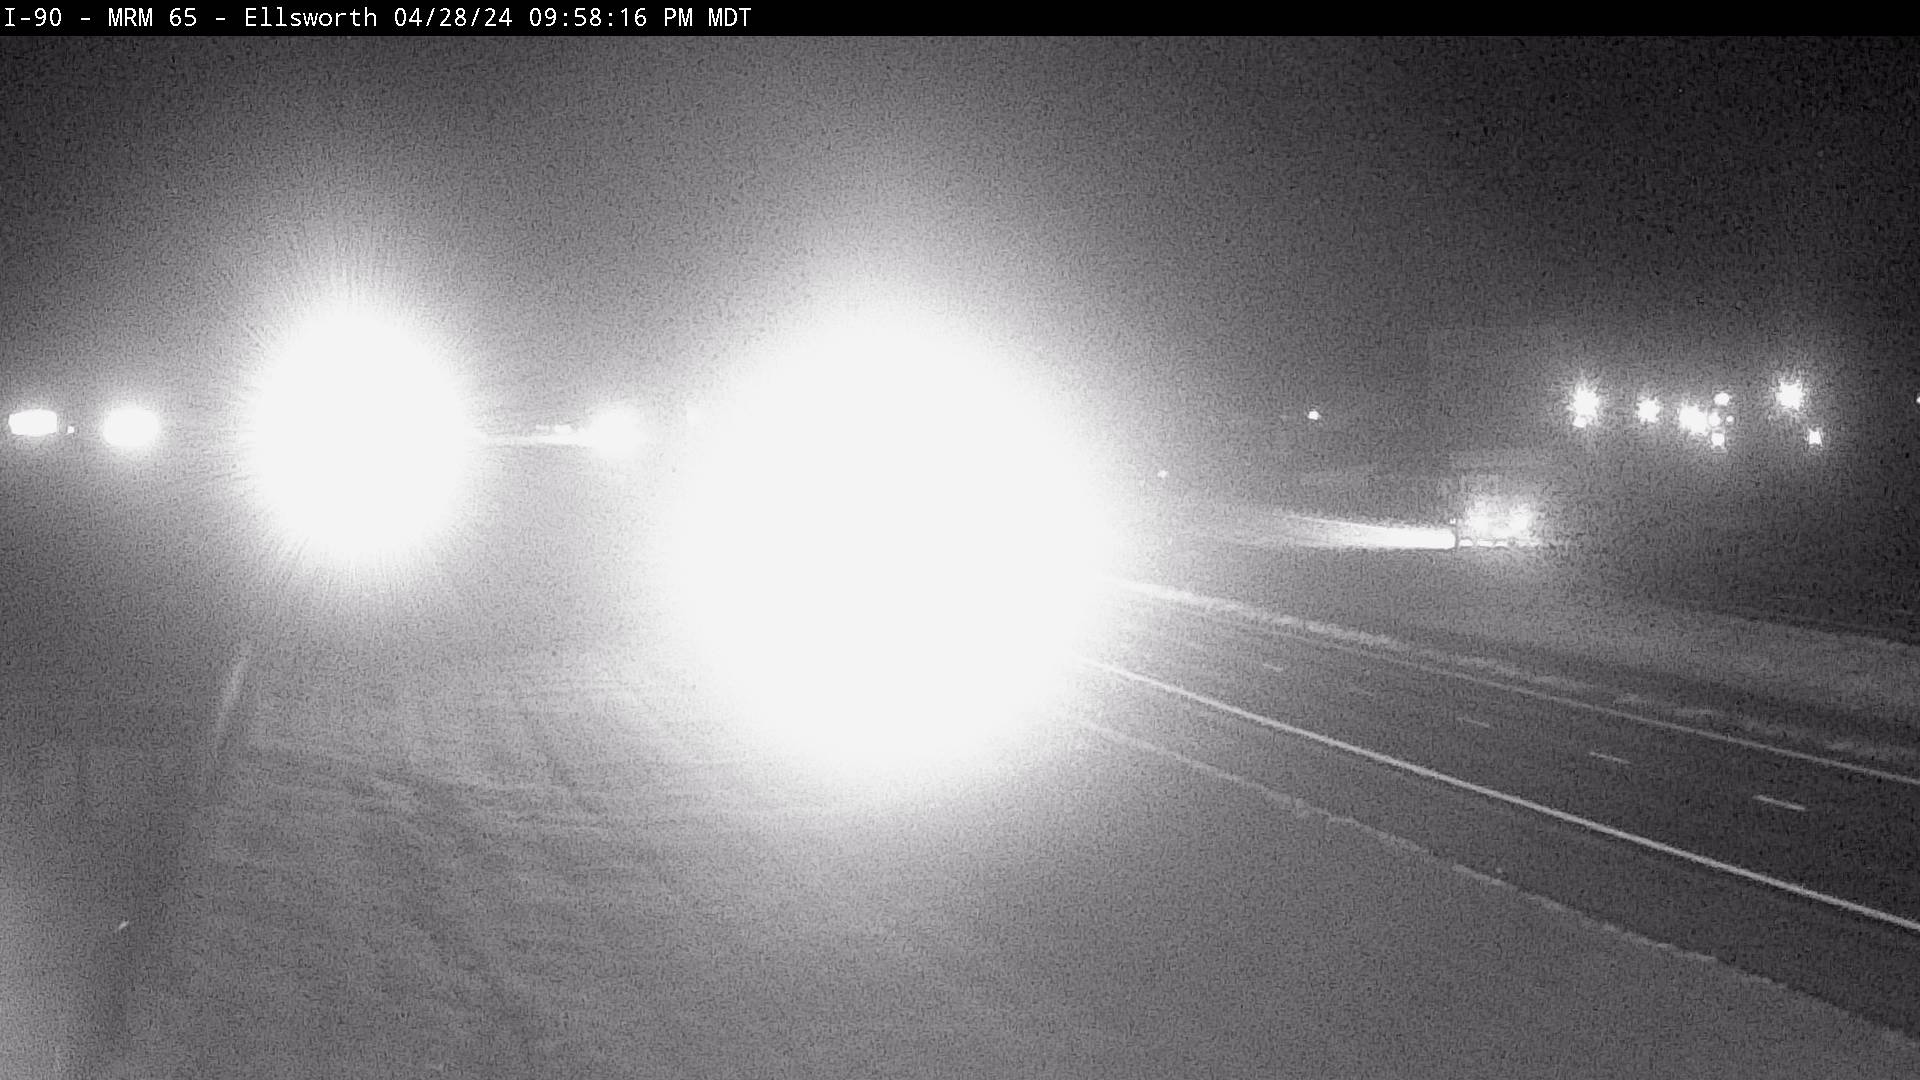 Traffic Cam 4 miles east of town along I-90 @ MP 65.2 - East Player